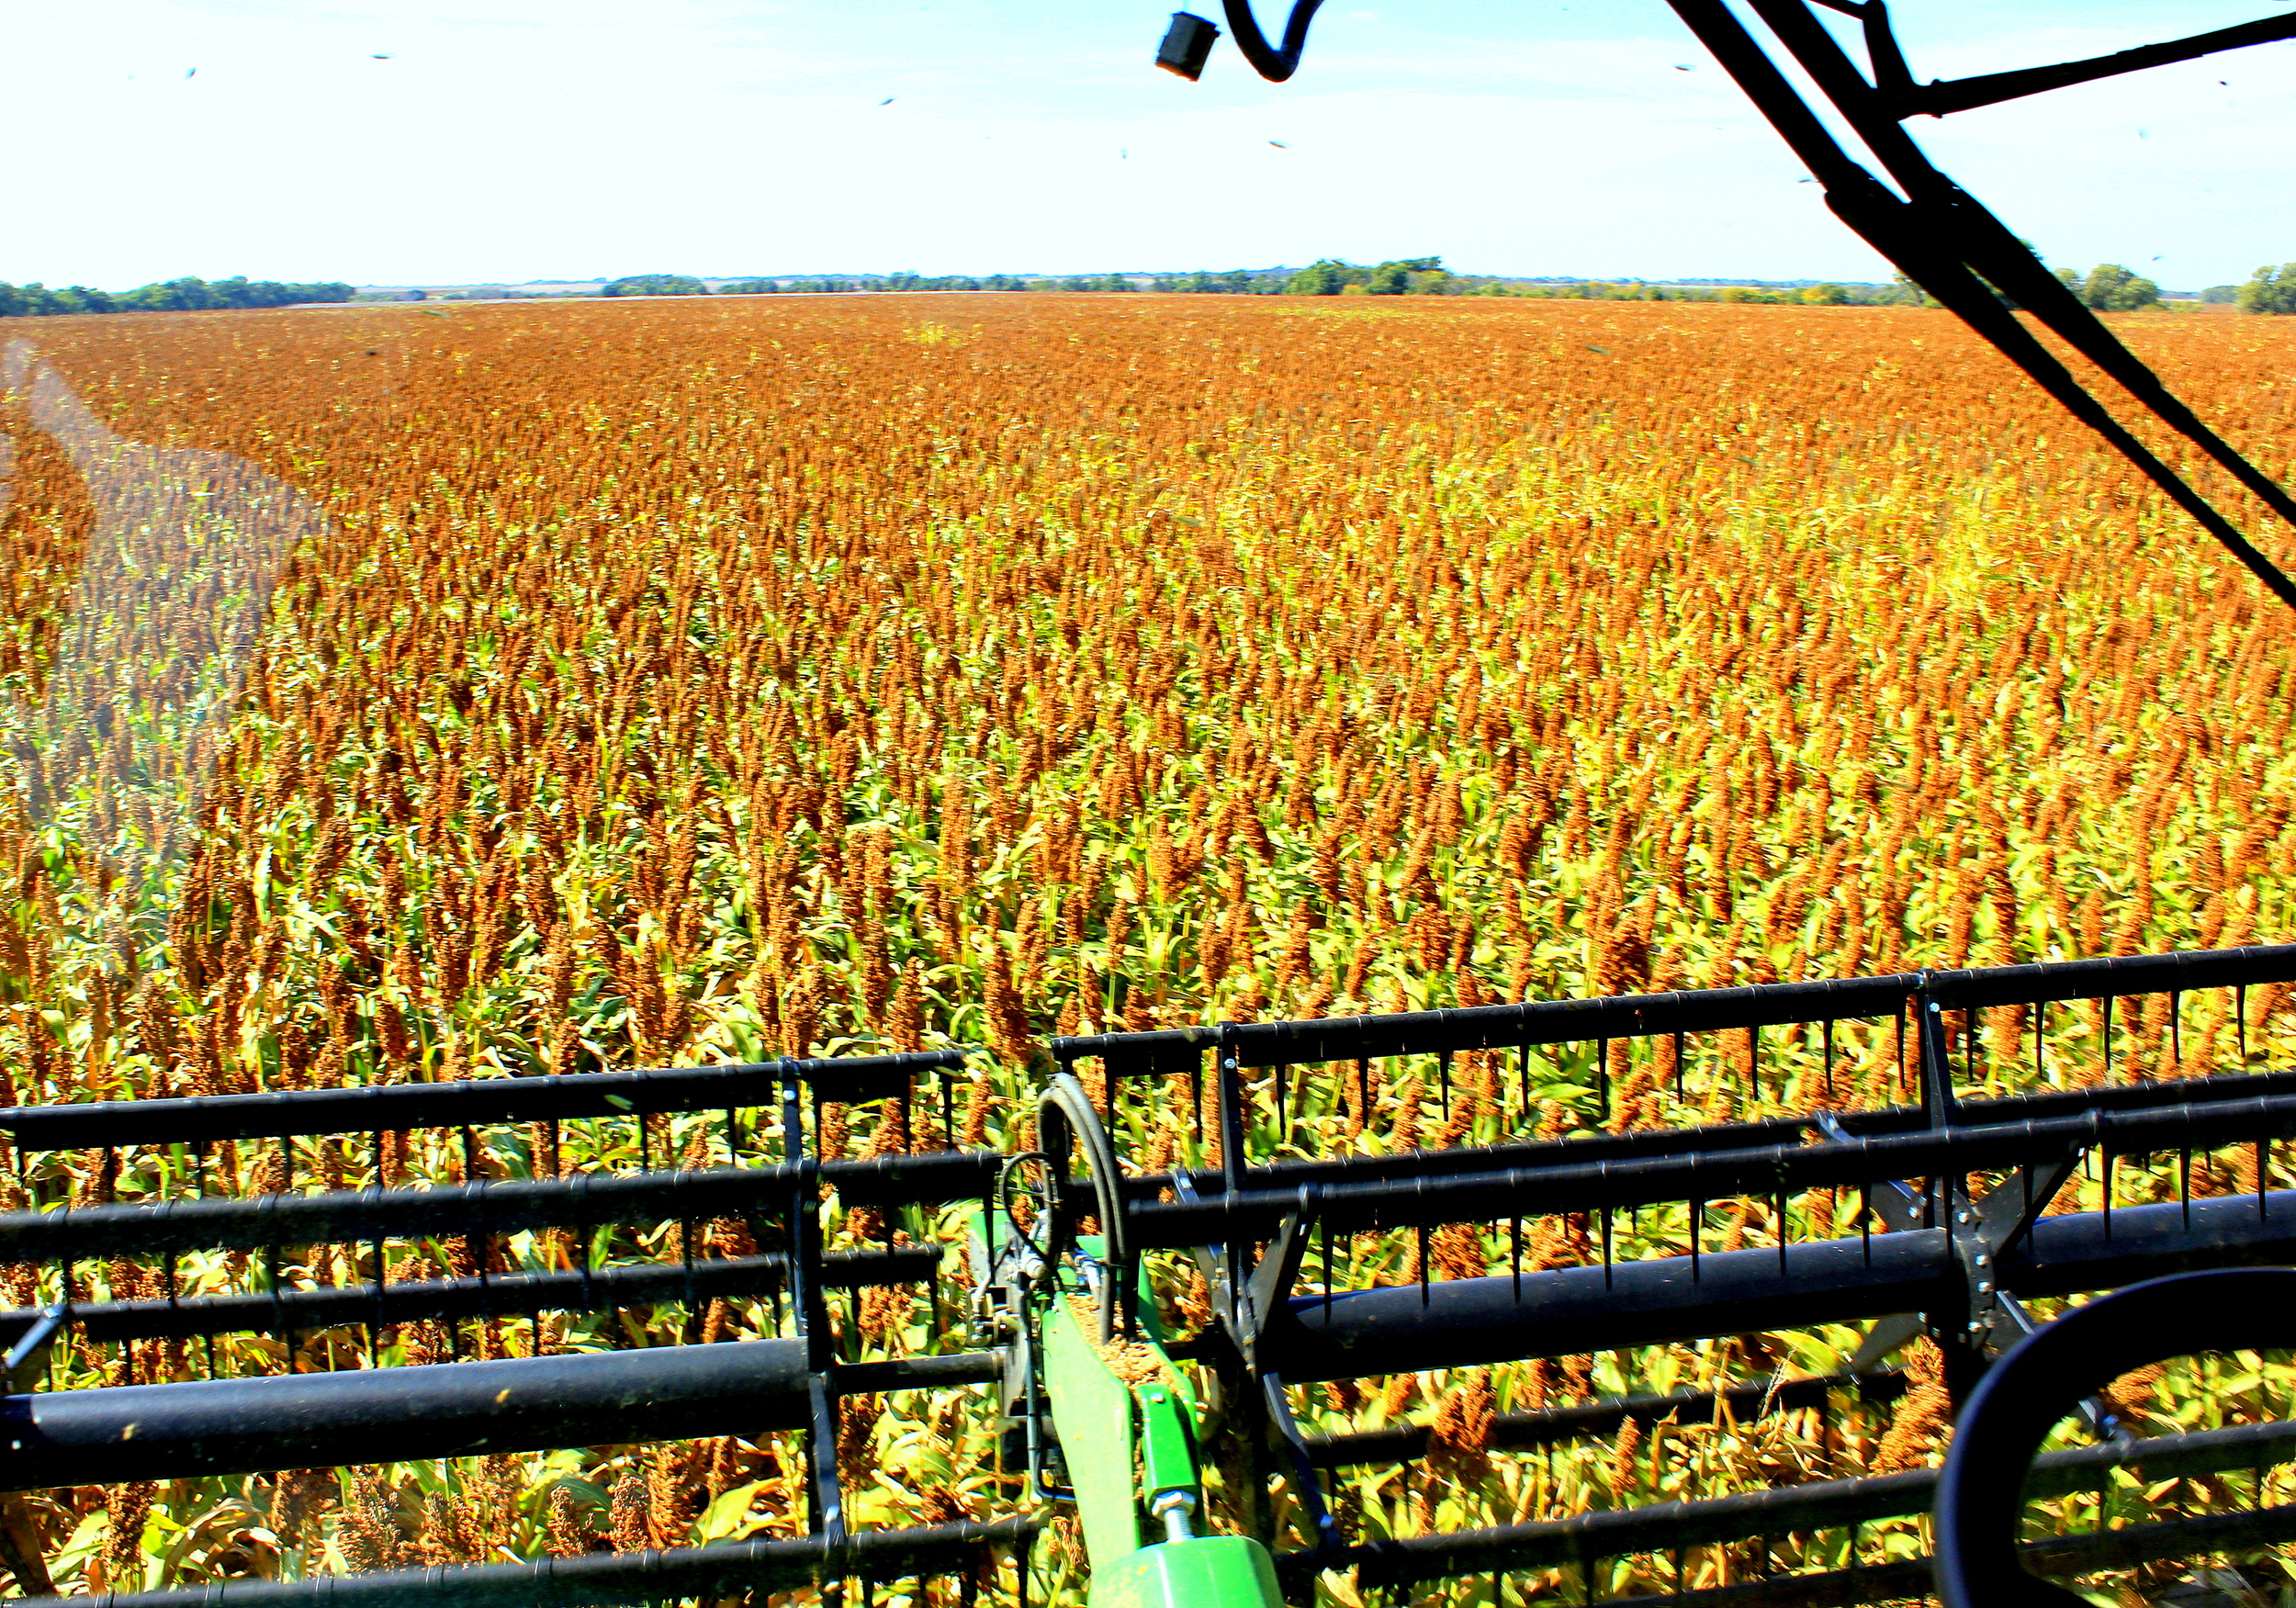 View from the cab of the combine